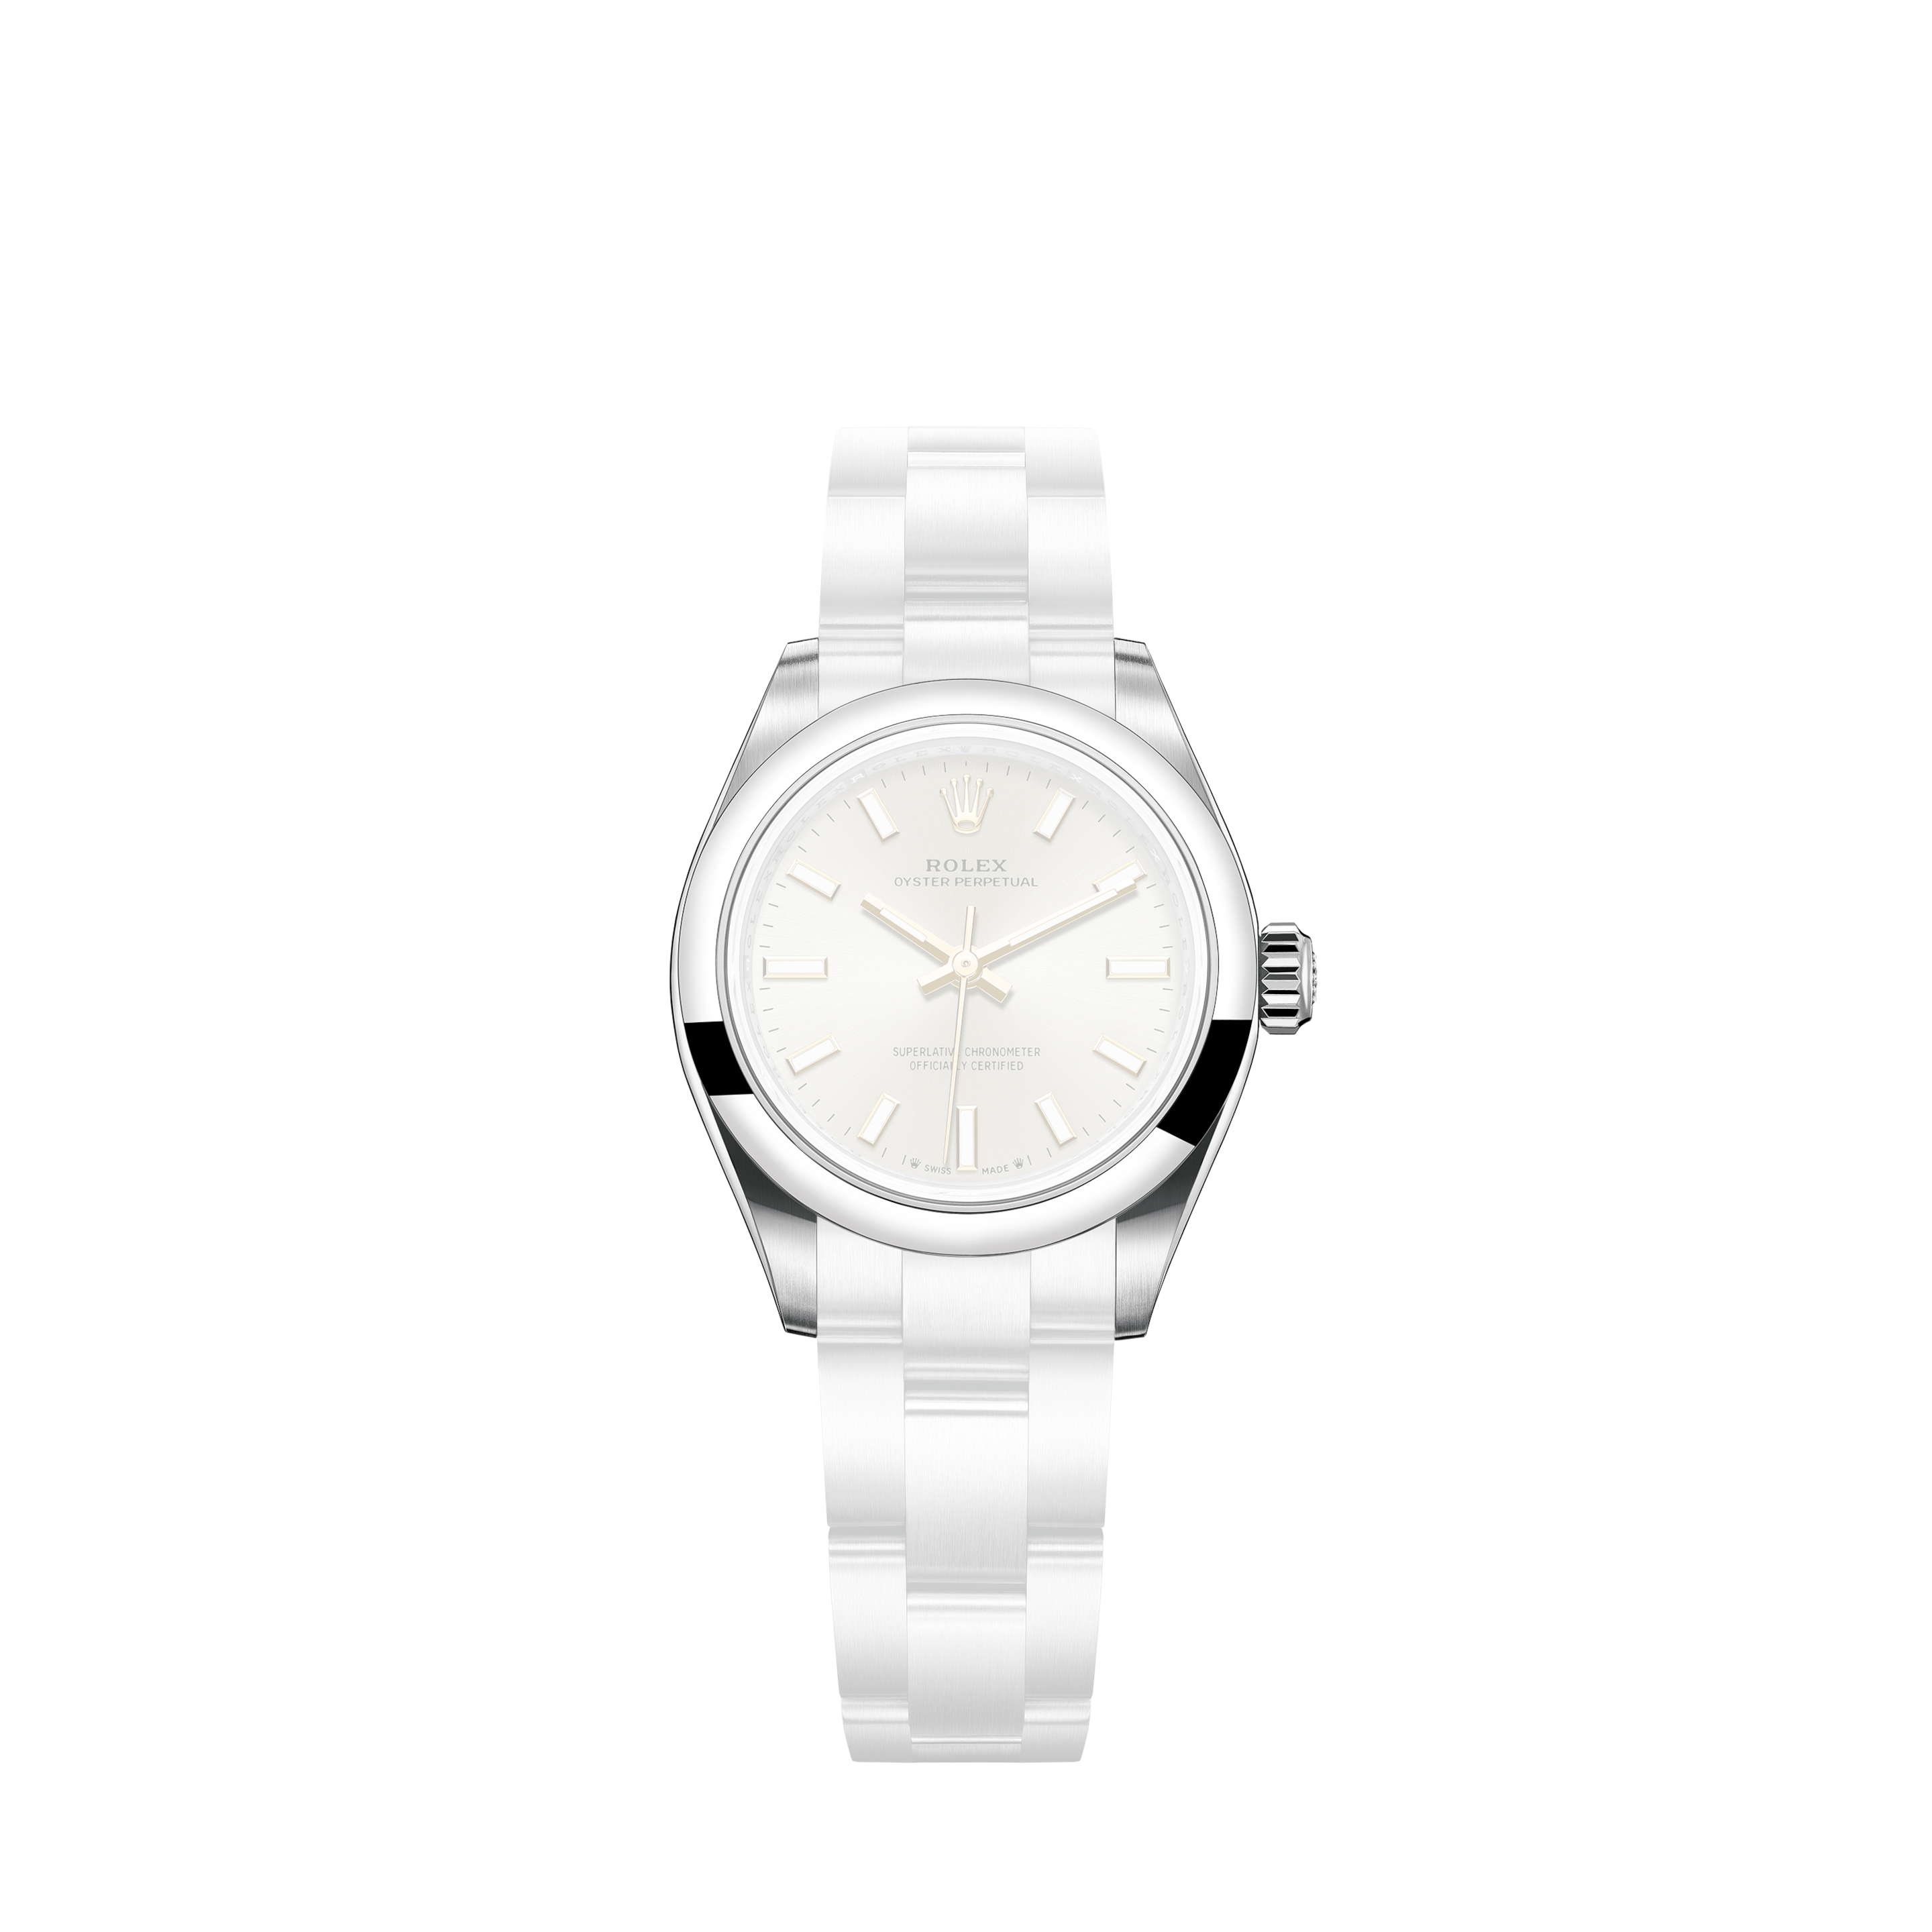 Rolex Oyster Perpetual Datejust 36mm Silver Dial & Diamonds Stainless Steel Automatic Watch